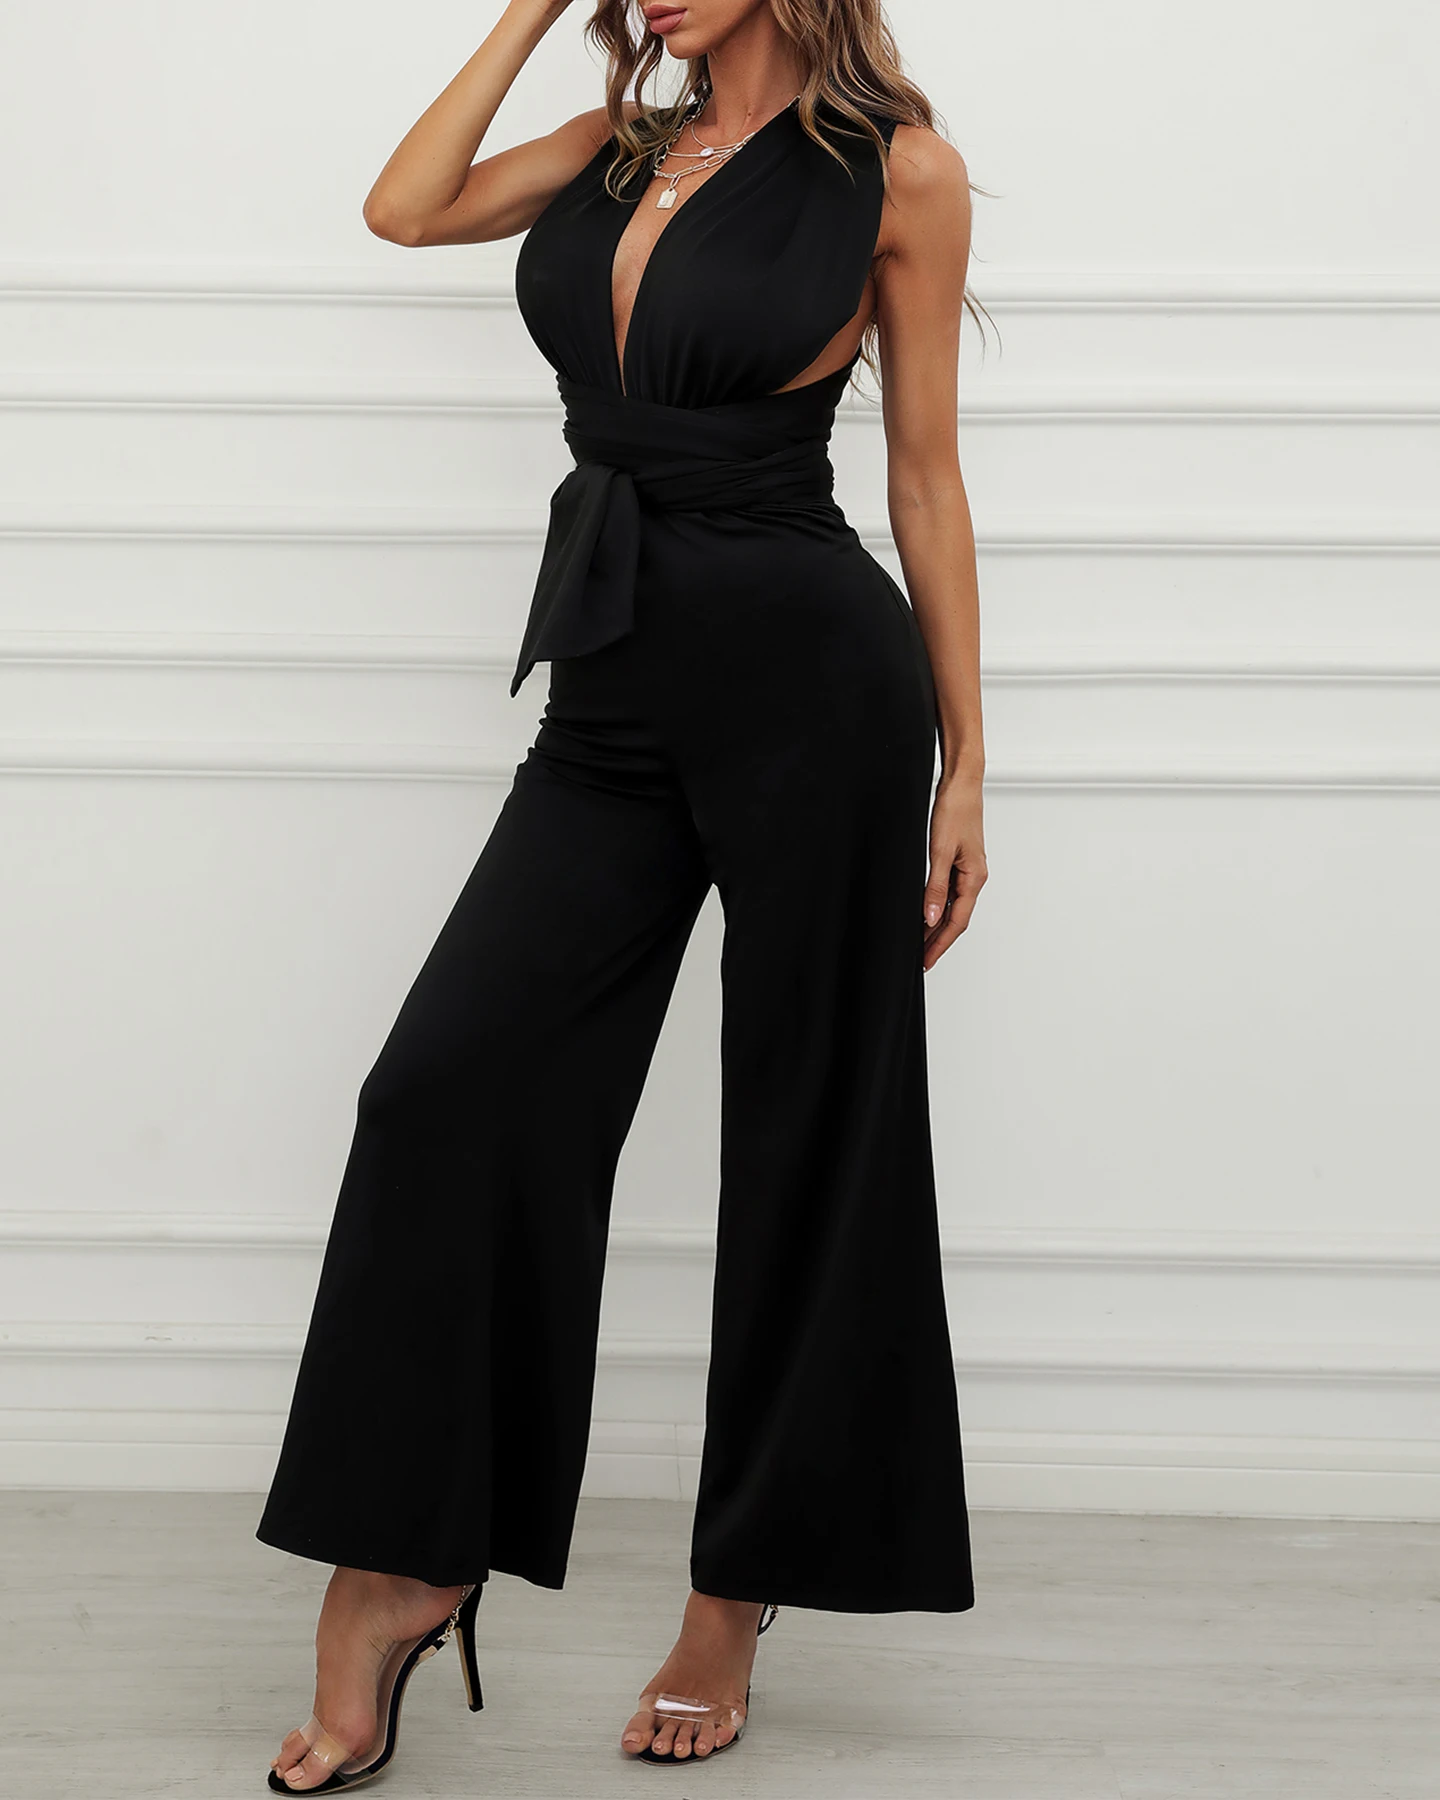 

Summer Women Jumpsuit Plain V Neck Knotted Flared Crossed Back Long Wide Pants Rompers Office Overalls New